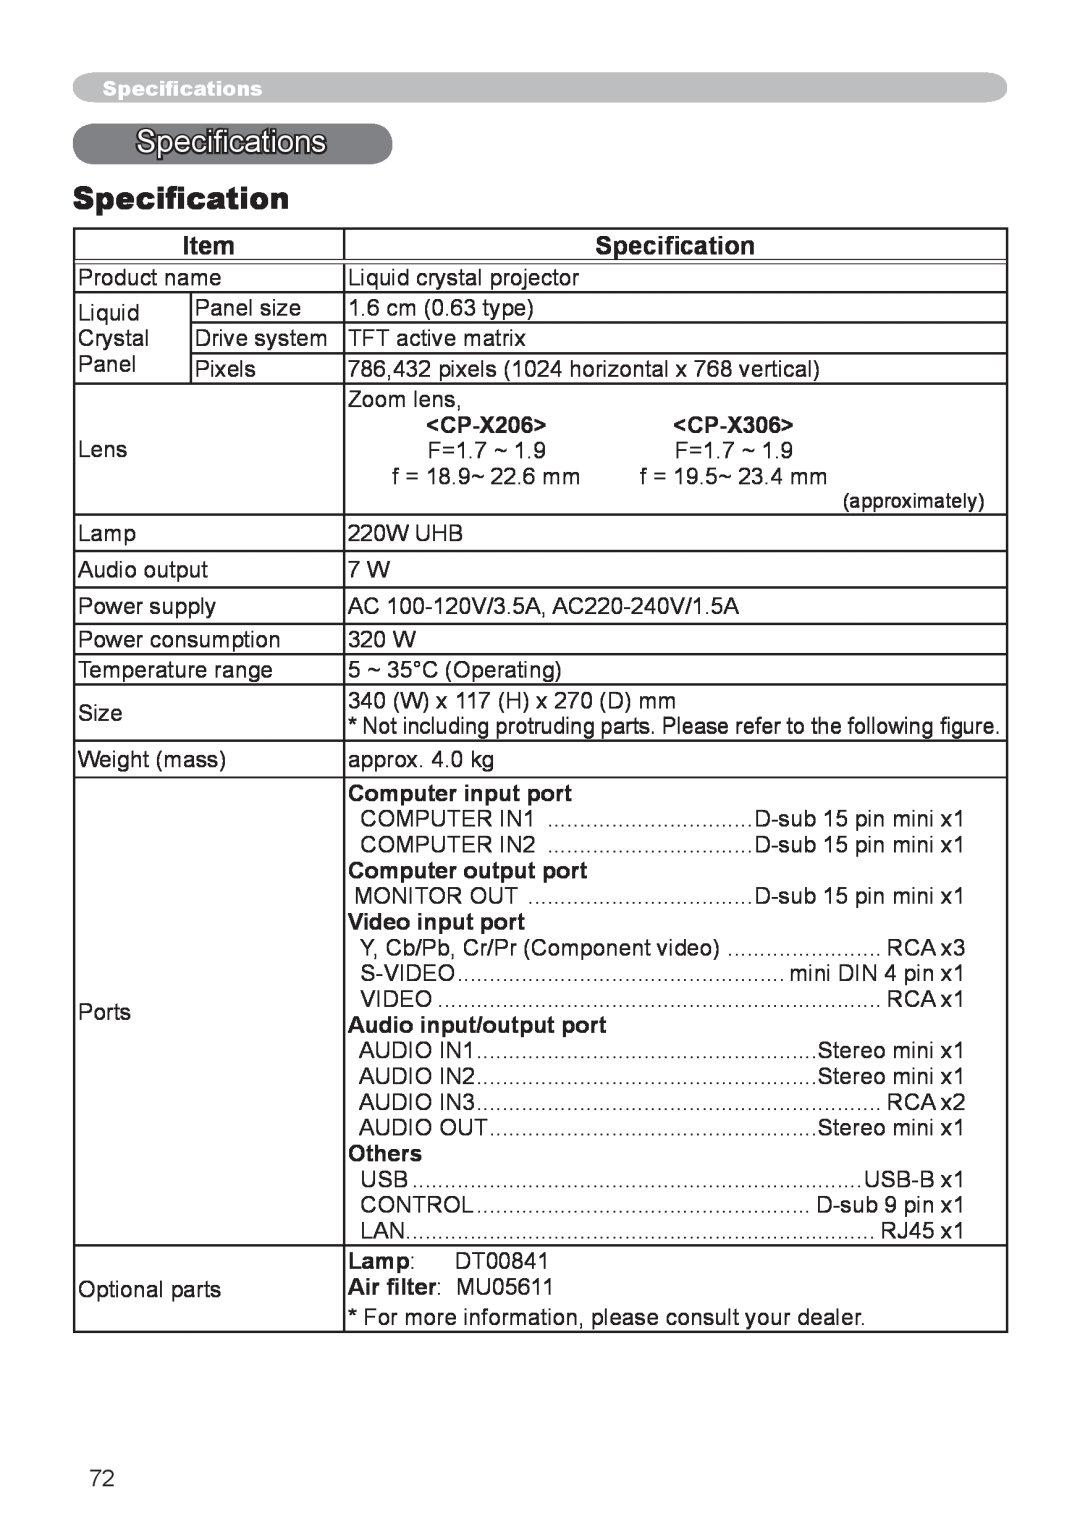 Hitachi CP-X206 user manual Specifications, CP-X306, Computer input port, Computer output port, Video input port, Others 